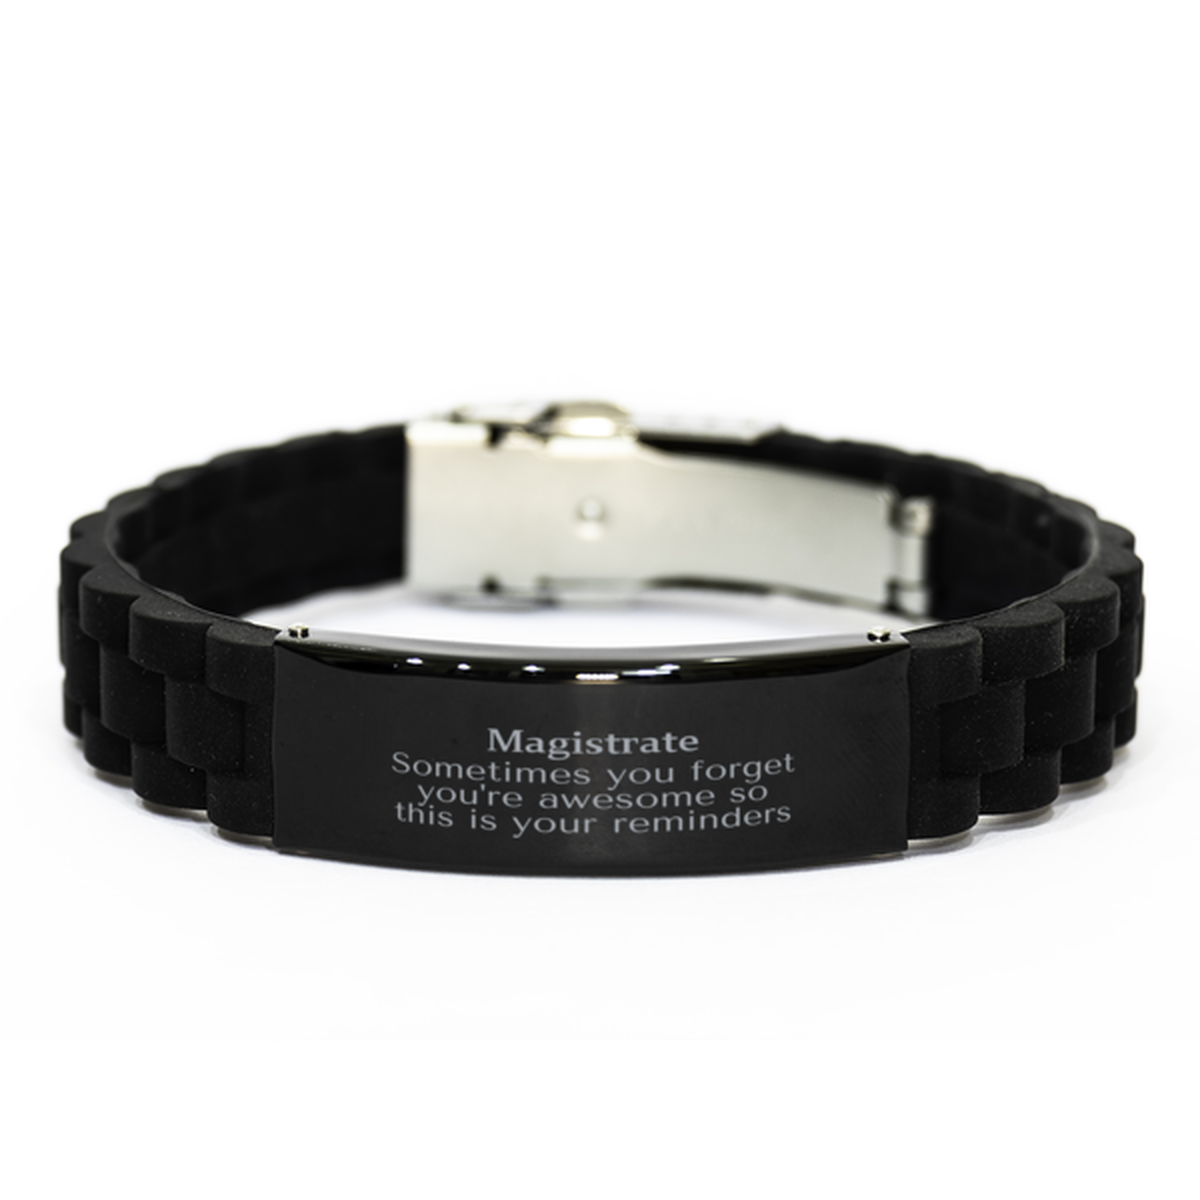 Sentimental Magistrate Black Glidelock Clasp Bracelet, Magistrate Sometimes you forget you're awesome so this is your reminders, Graduation Christmas Birthday Gifts for Magistrate, Men, Women, Coworkers